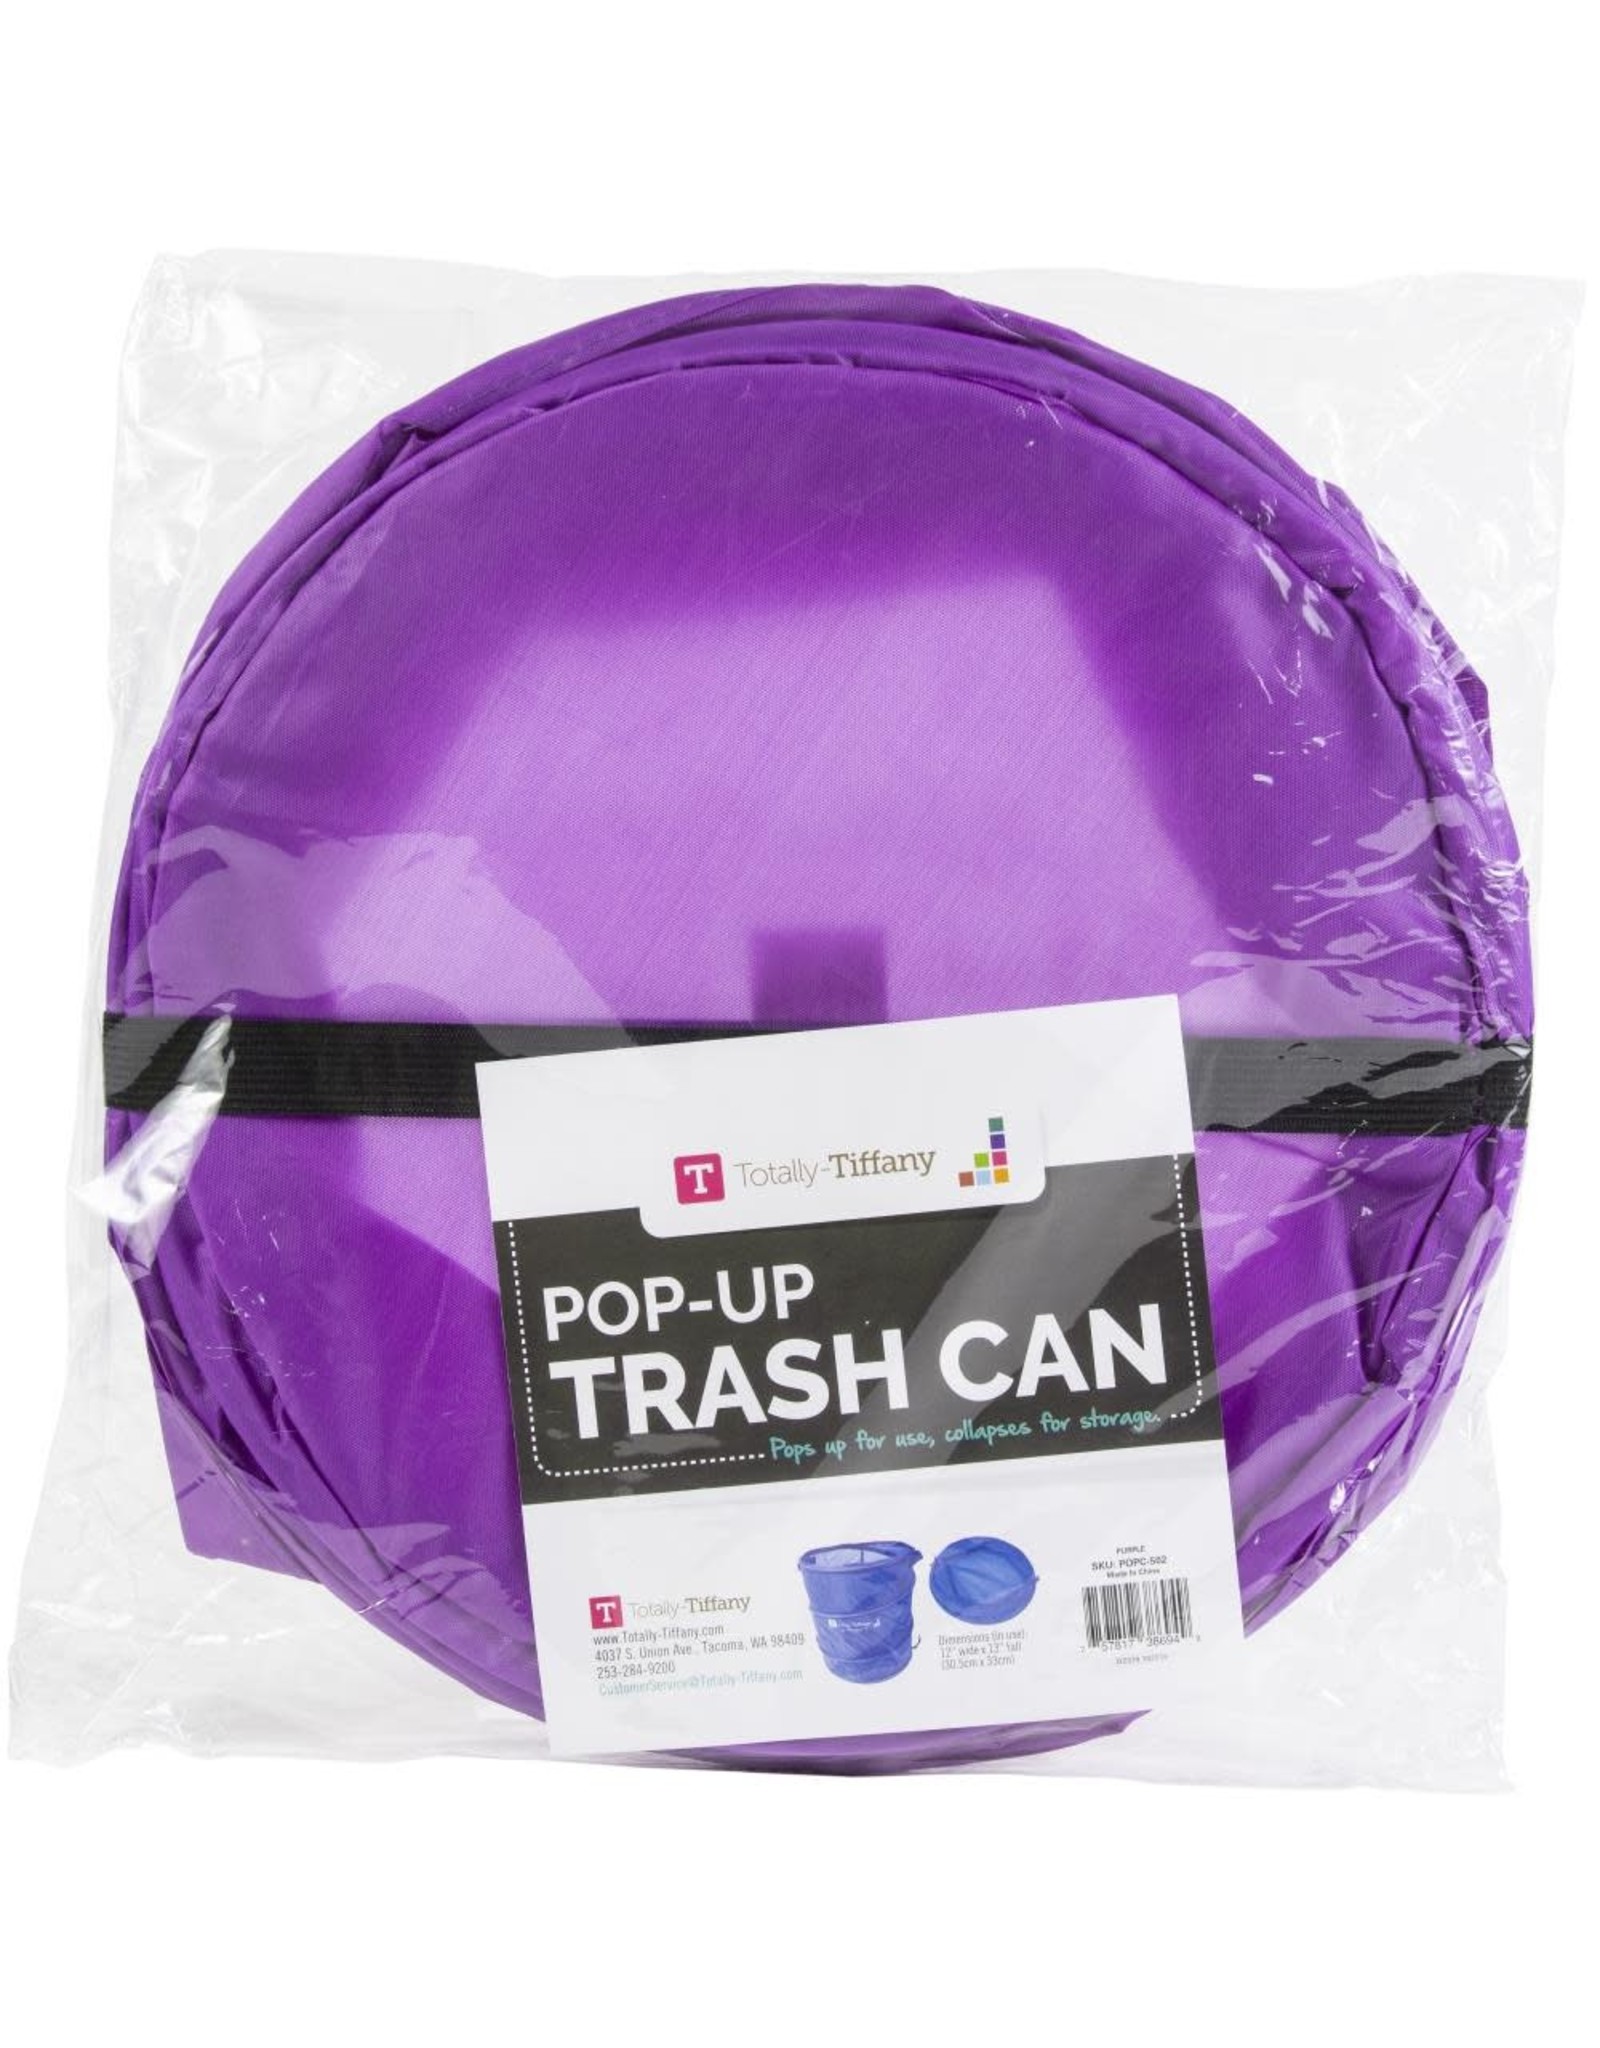 TOTALLY TIFFANY TOTALLY TIFFANY PURPLE POP-UP TRASH CAN